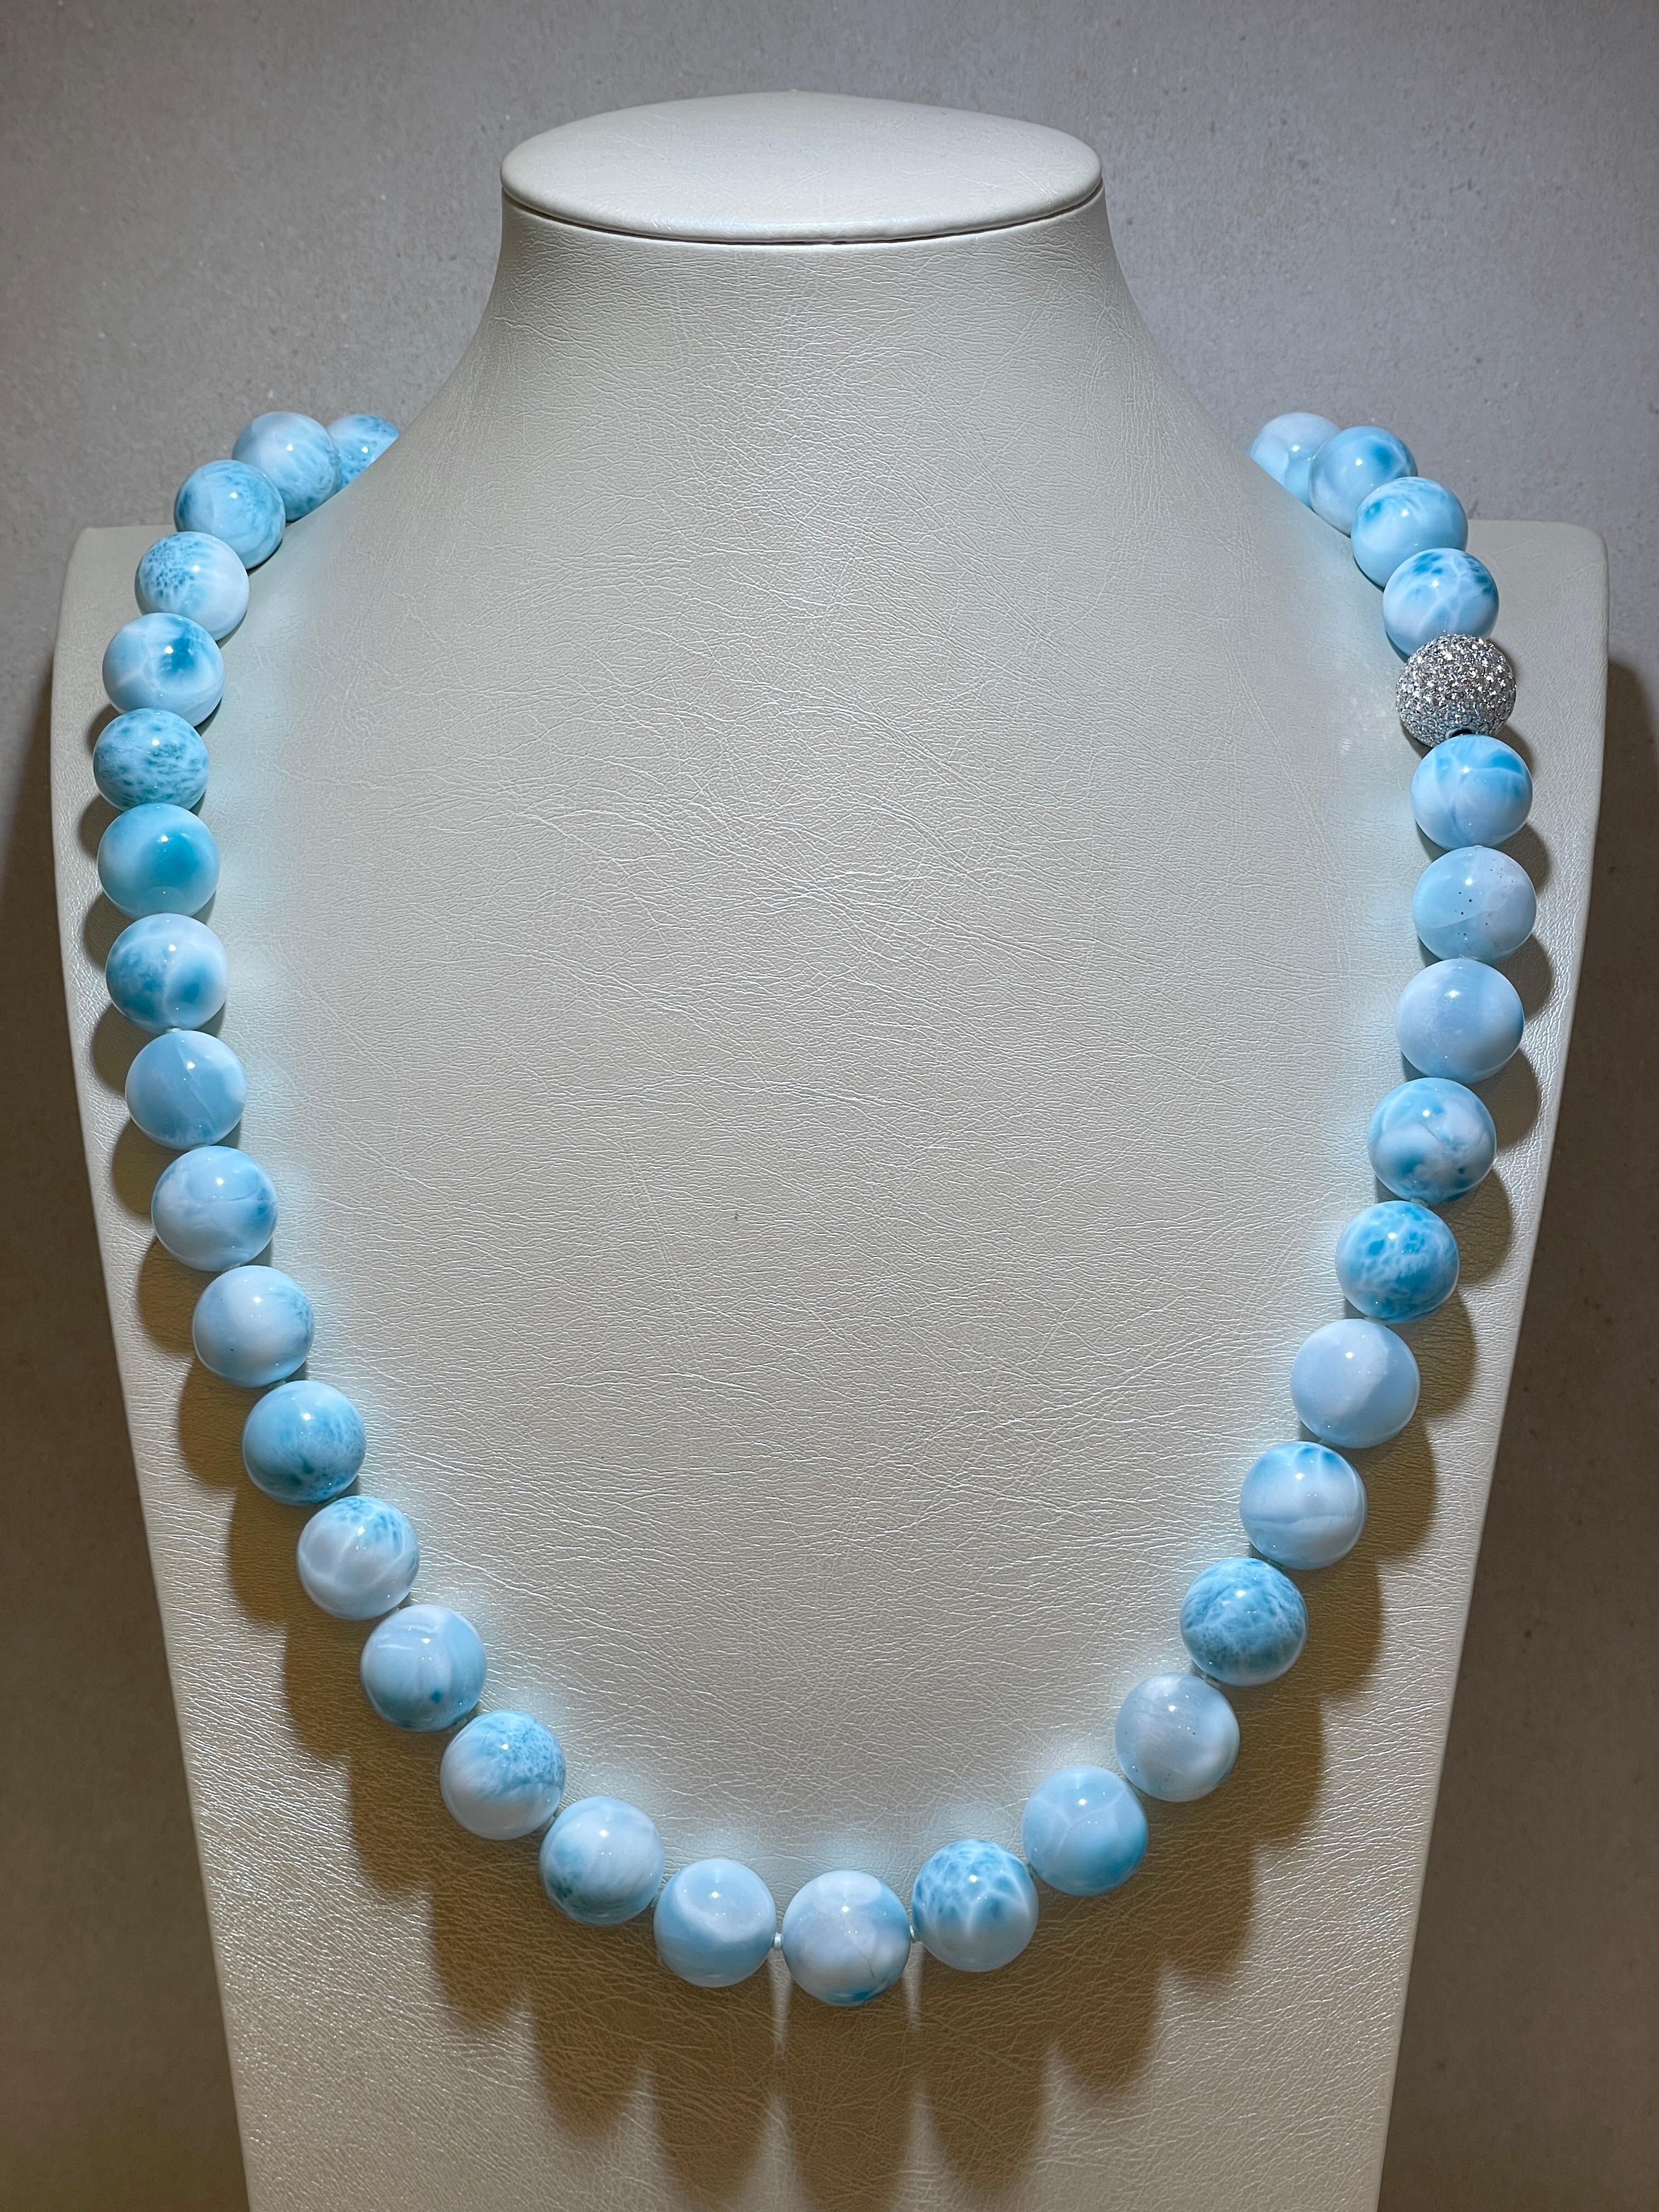 This Larimar necklace, comprised of 45 beads measuring 16mm each, is adorned with a diamond clasp. The 16mm diamond clasp, featuring a total of 188 brilliant-cut diamonds weighing 5.44ct, can be replaced with a more affordable 18kt white gold clasp